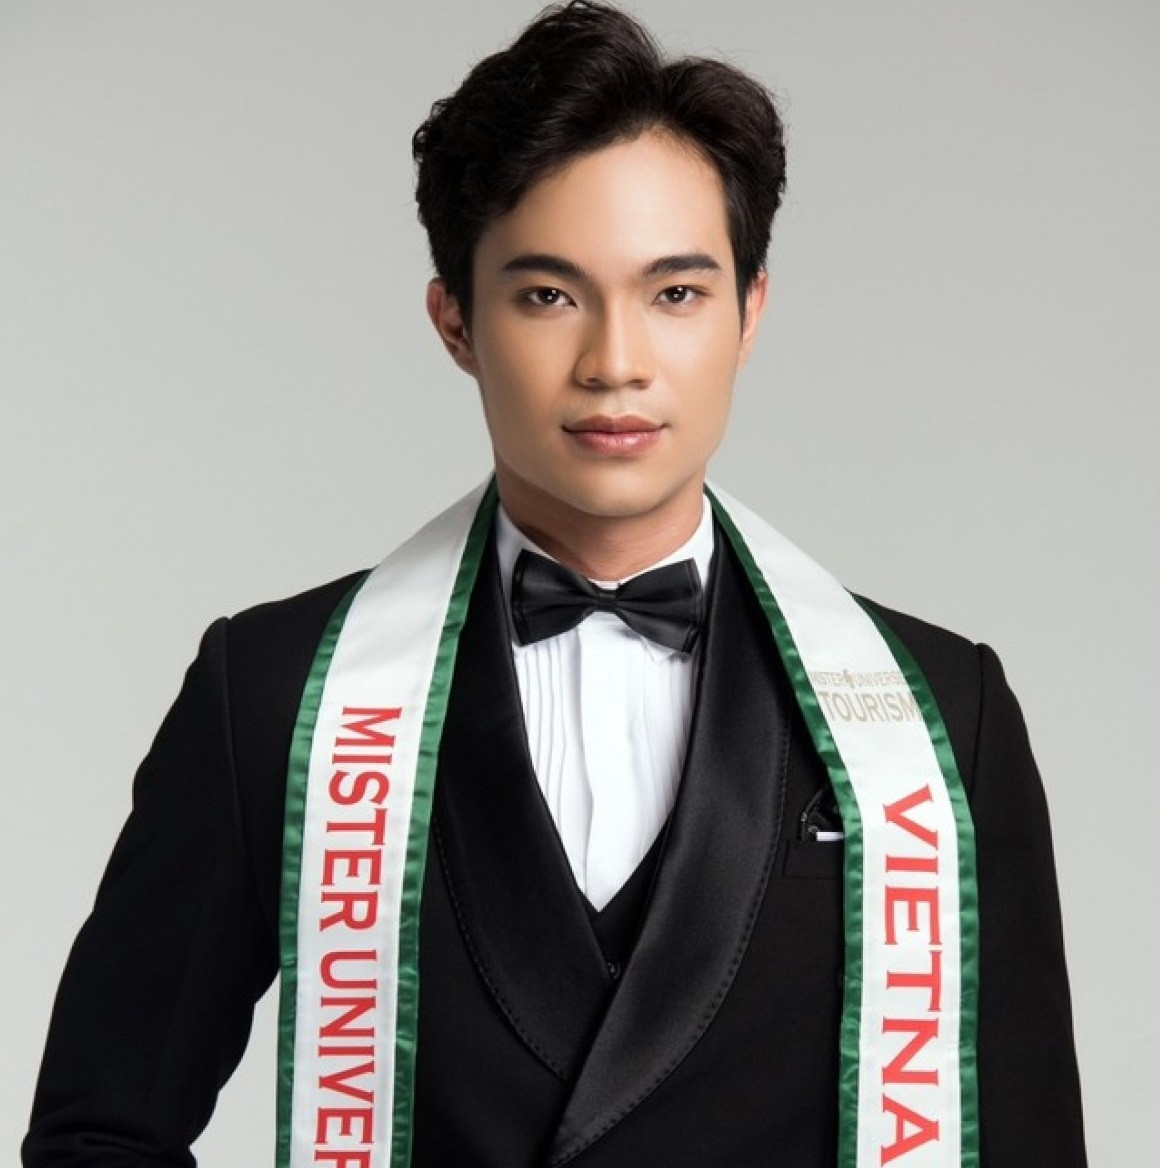 Local doctor to compete at Mister Universe Tourism 2023